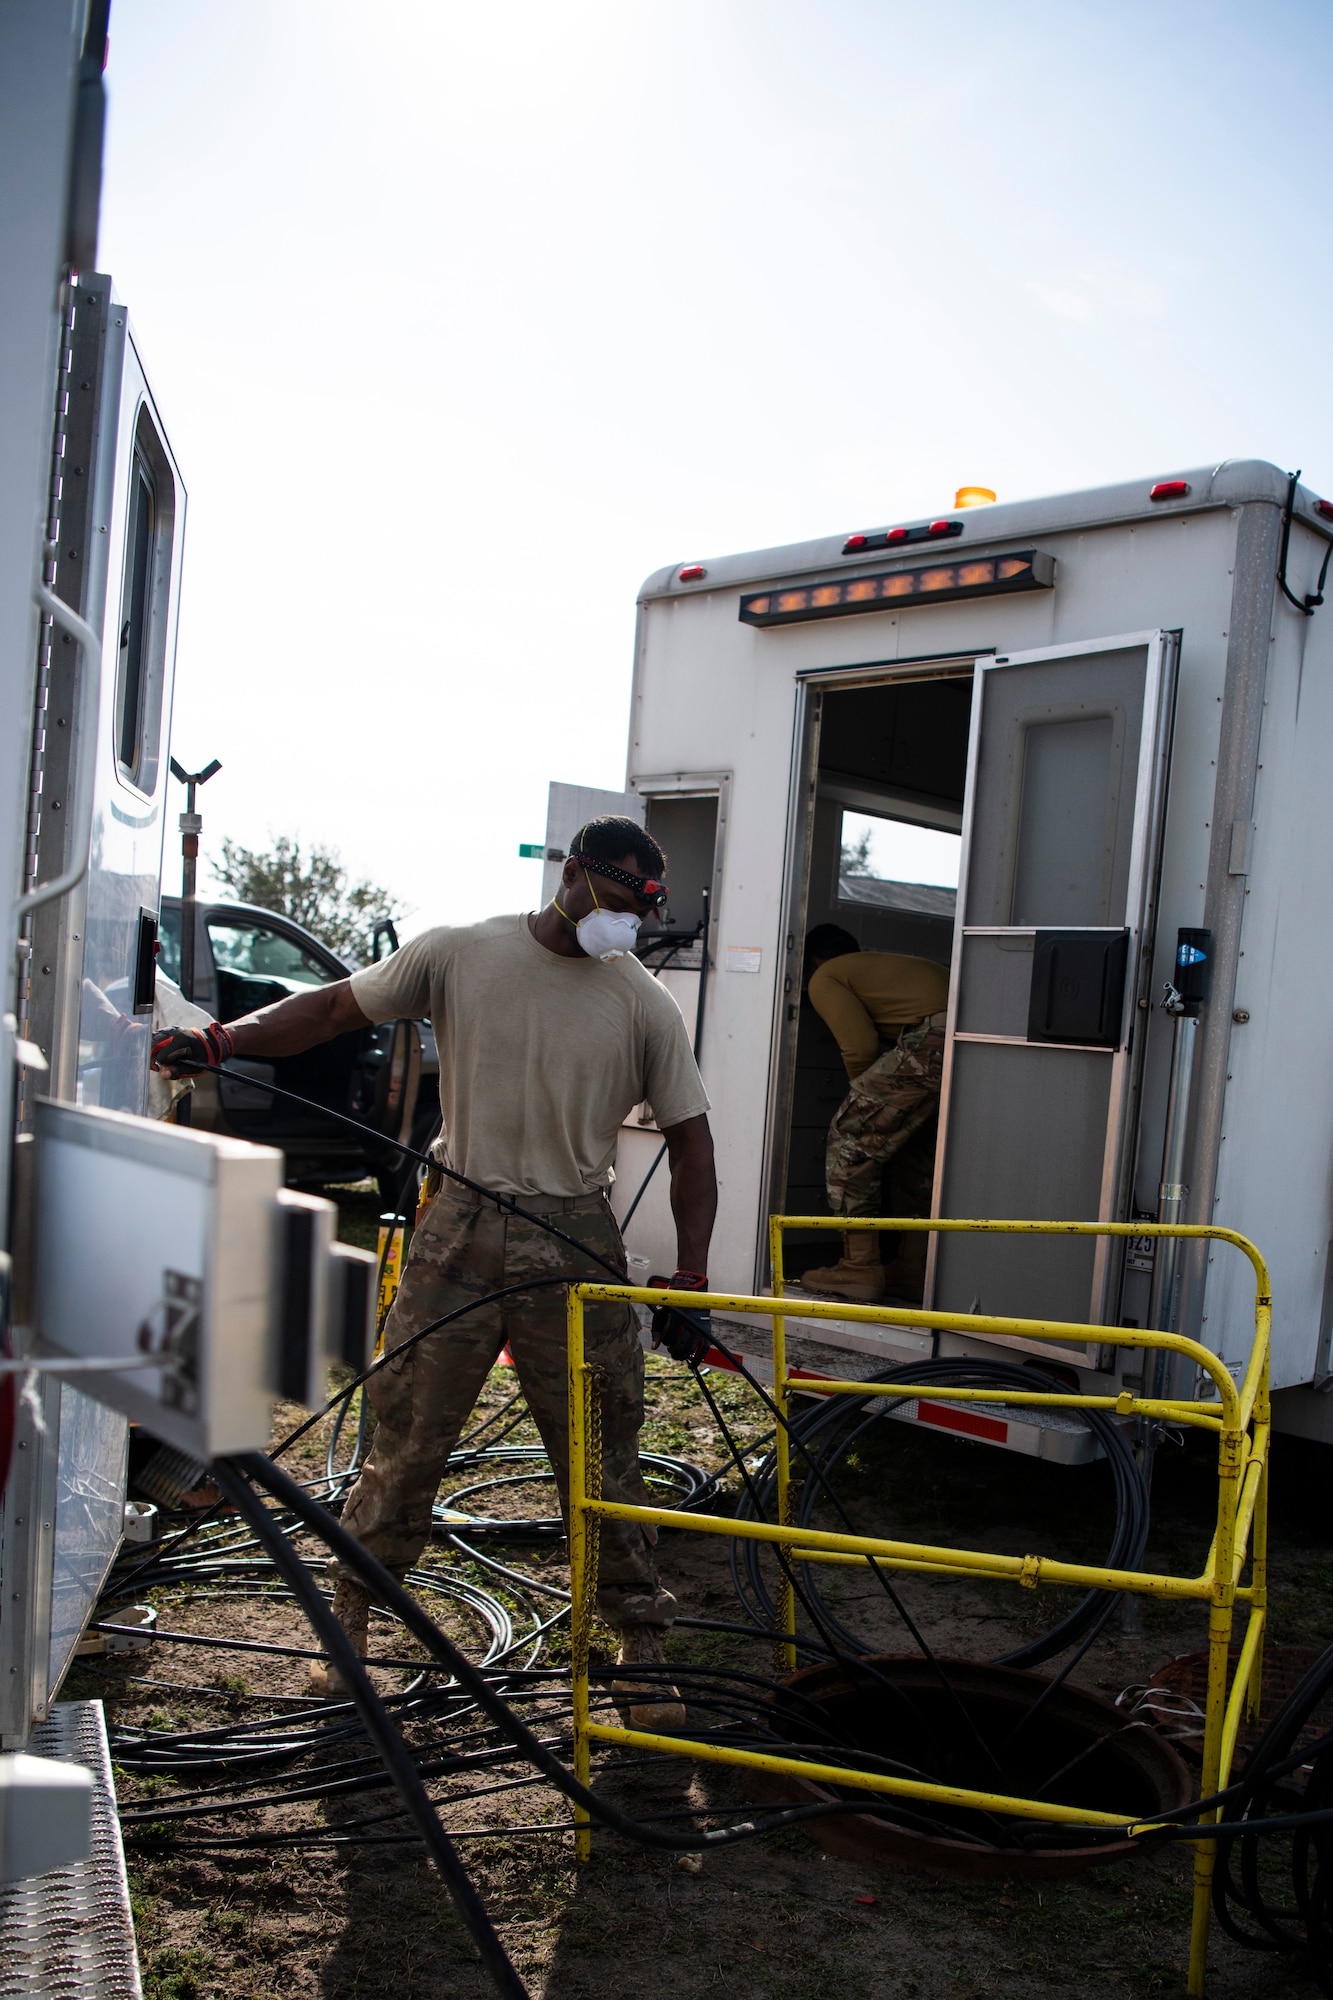 U.S. Air Force Tech. Sgt. Samuale Bailey, 85th Engineering Installation Squadron cable antenna maintenance technician, collects old cabling at Tyndall Air Force Base, Florida, Dec. 9, 2019. Bailey is part of a team from Keesler Air Force Base working with the 325th Communications Squadron to relocate a core network node. (U.S. Air Force photo by Tech. Sgt. Clayton Lenhardt)